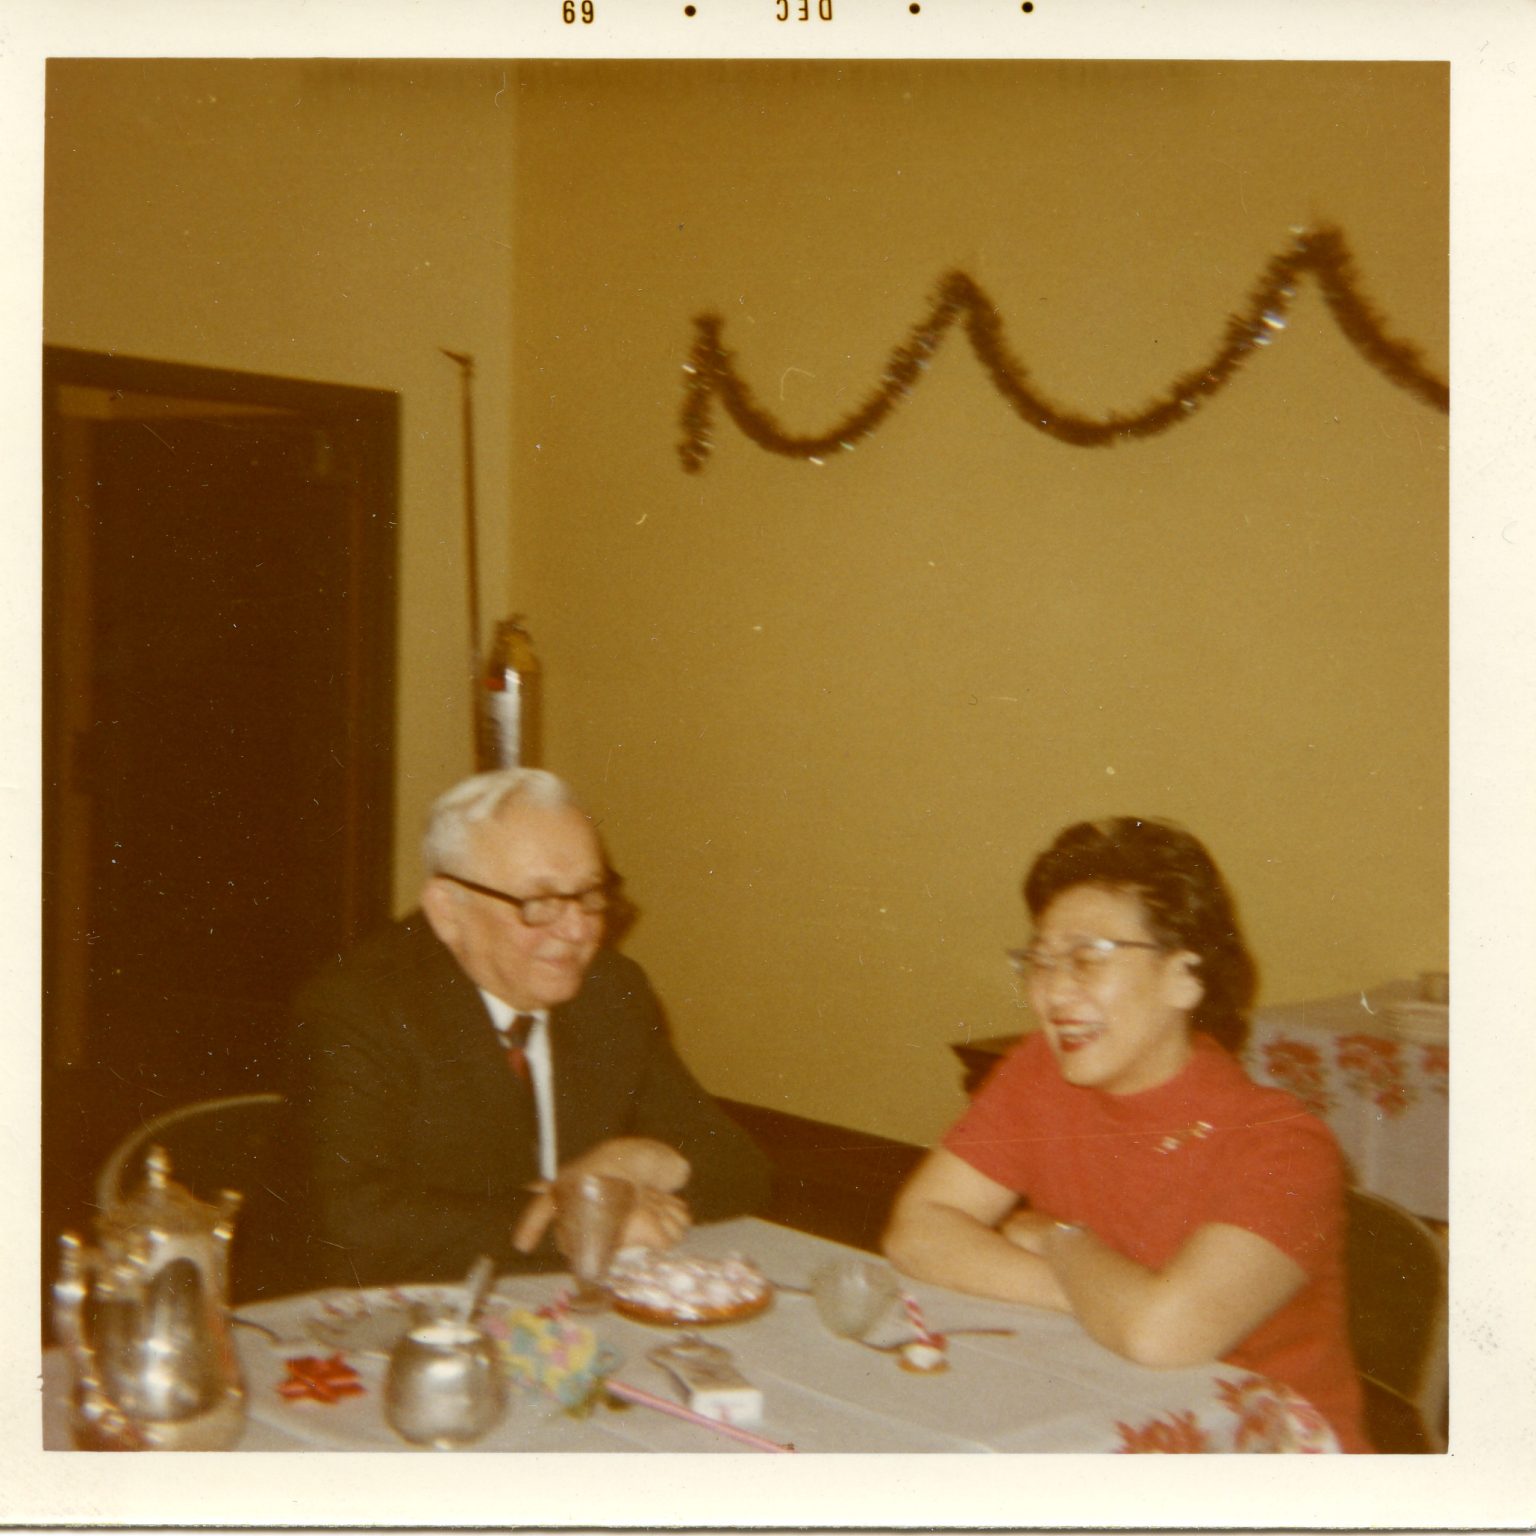 Alexander J. Skrzypek and Ruth Kumata sit at a table and talk during a staff gathering.